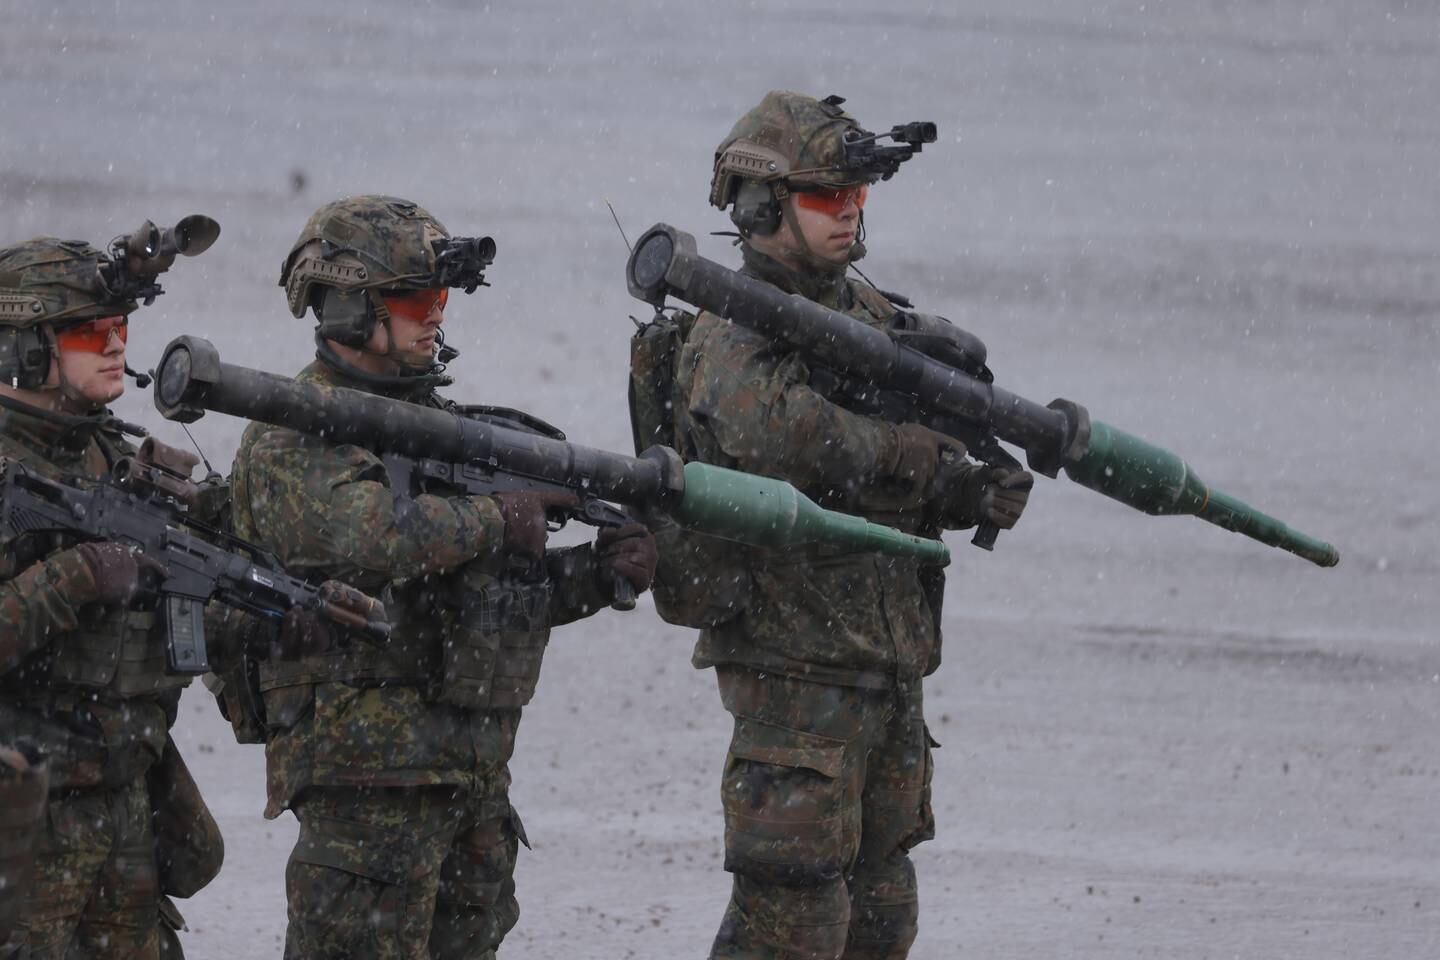 German soldiers demonstrate how to use Panzerfaust 3 anti-tank weapons. Getty Images